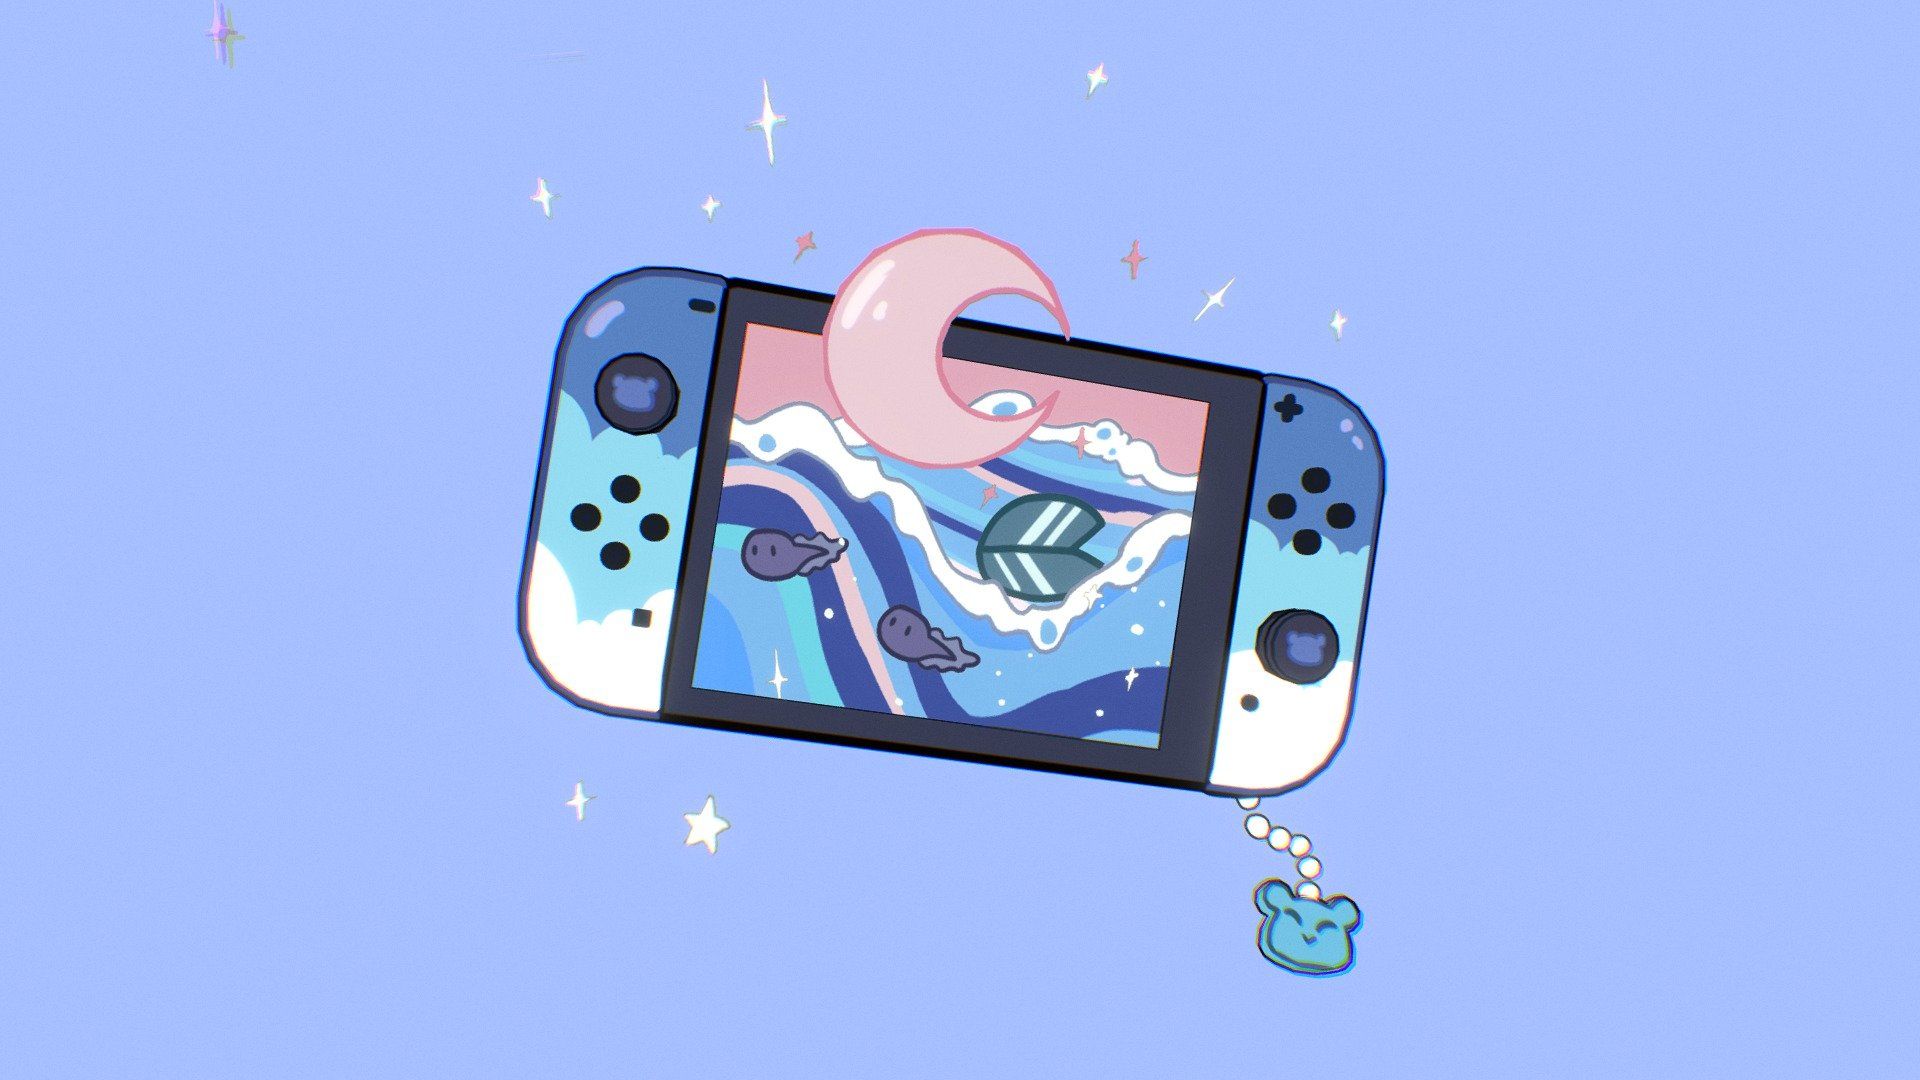 A Nintendo Switch with a screen of a character holding a leaf, with a speech bubble coming from the bottom of the screen. - Nintendo